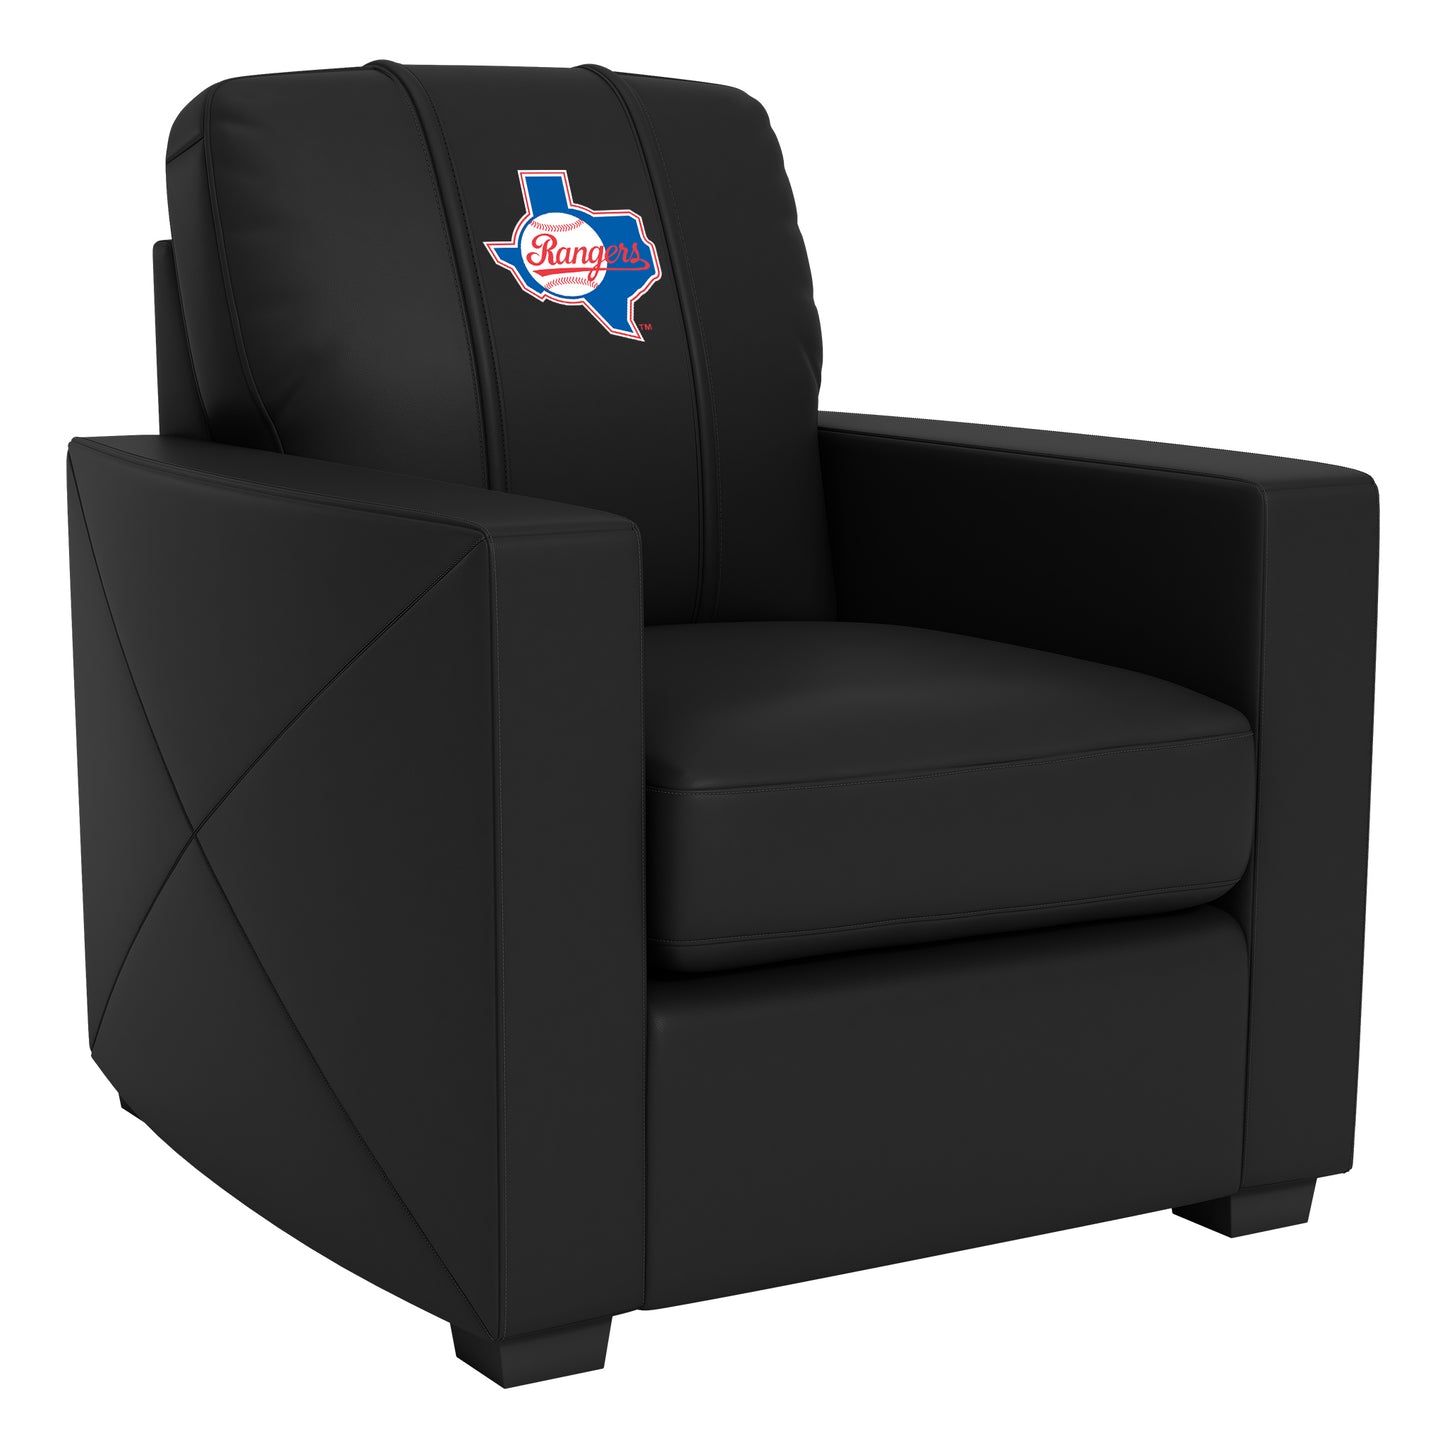 Silver Club Chair with Texas Rangers Cooperstown